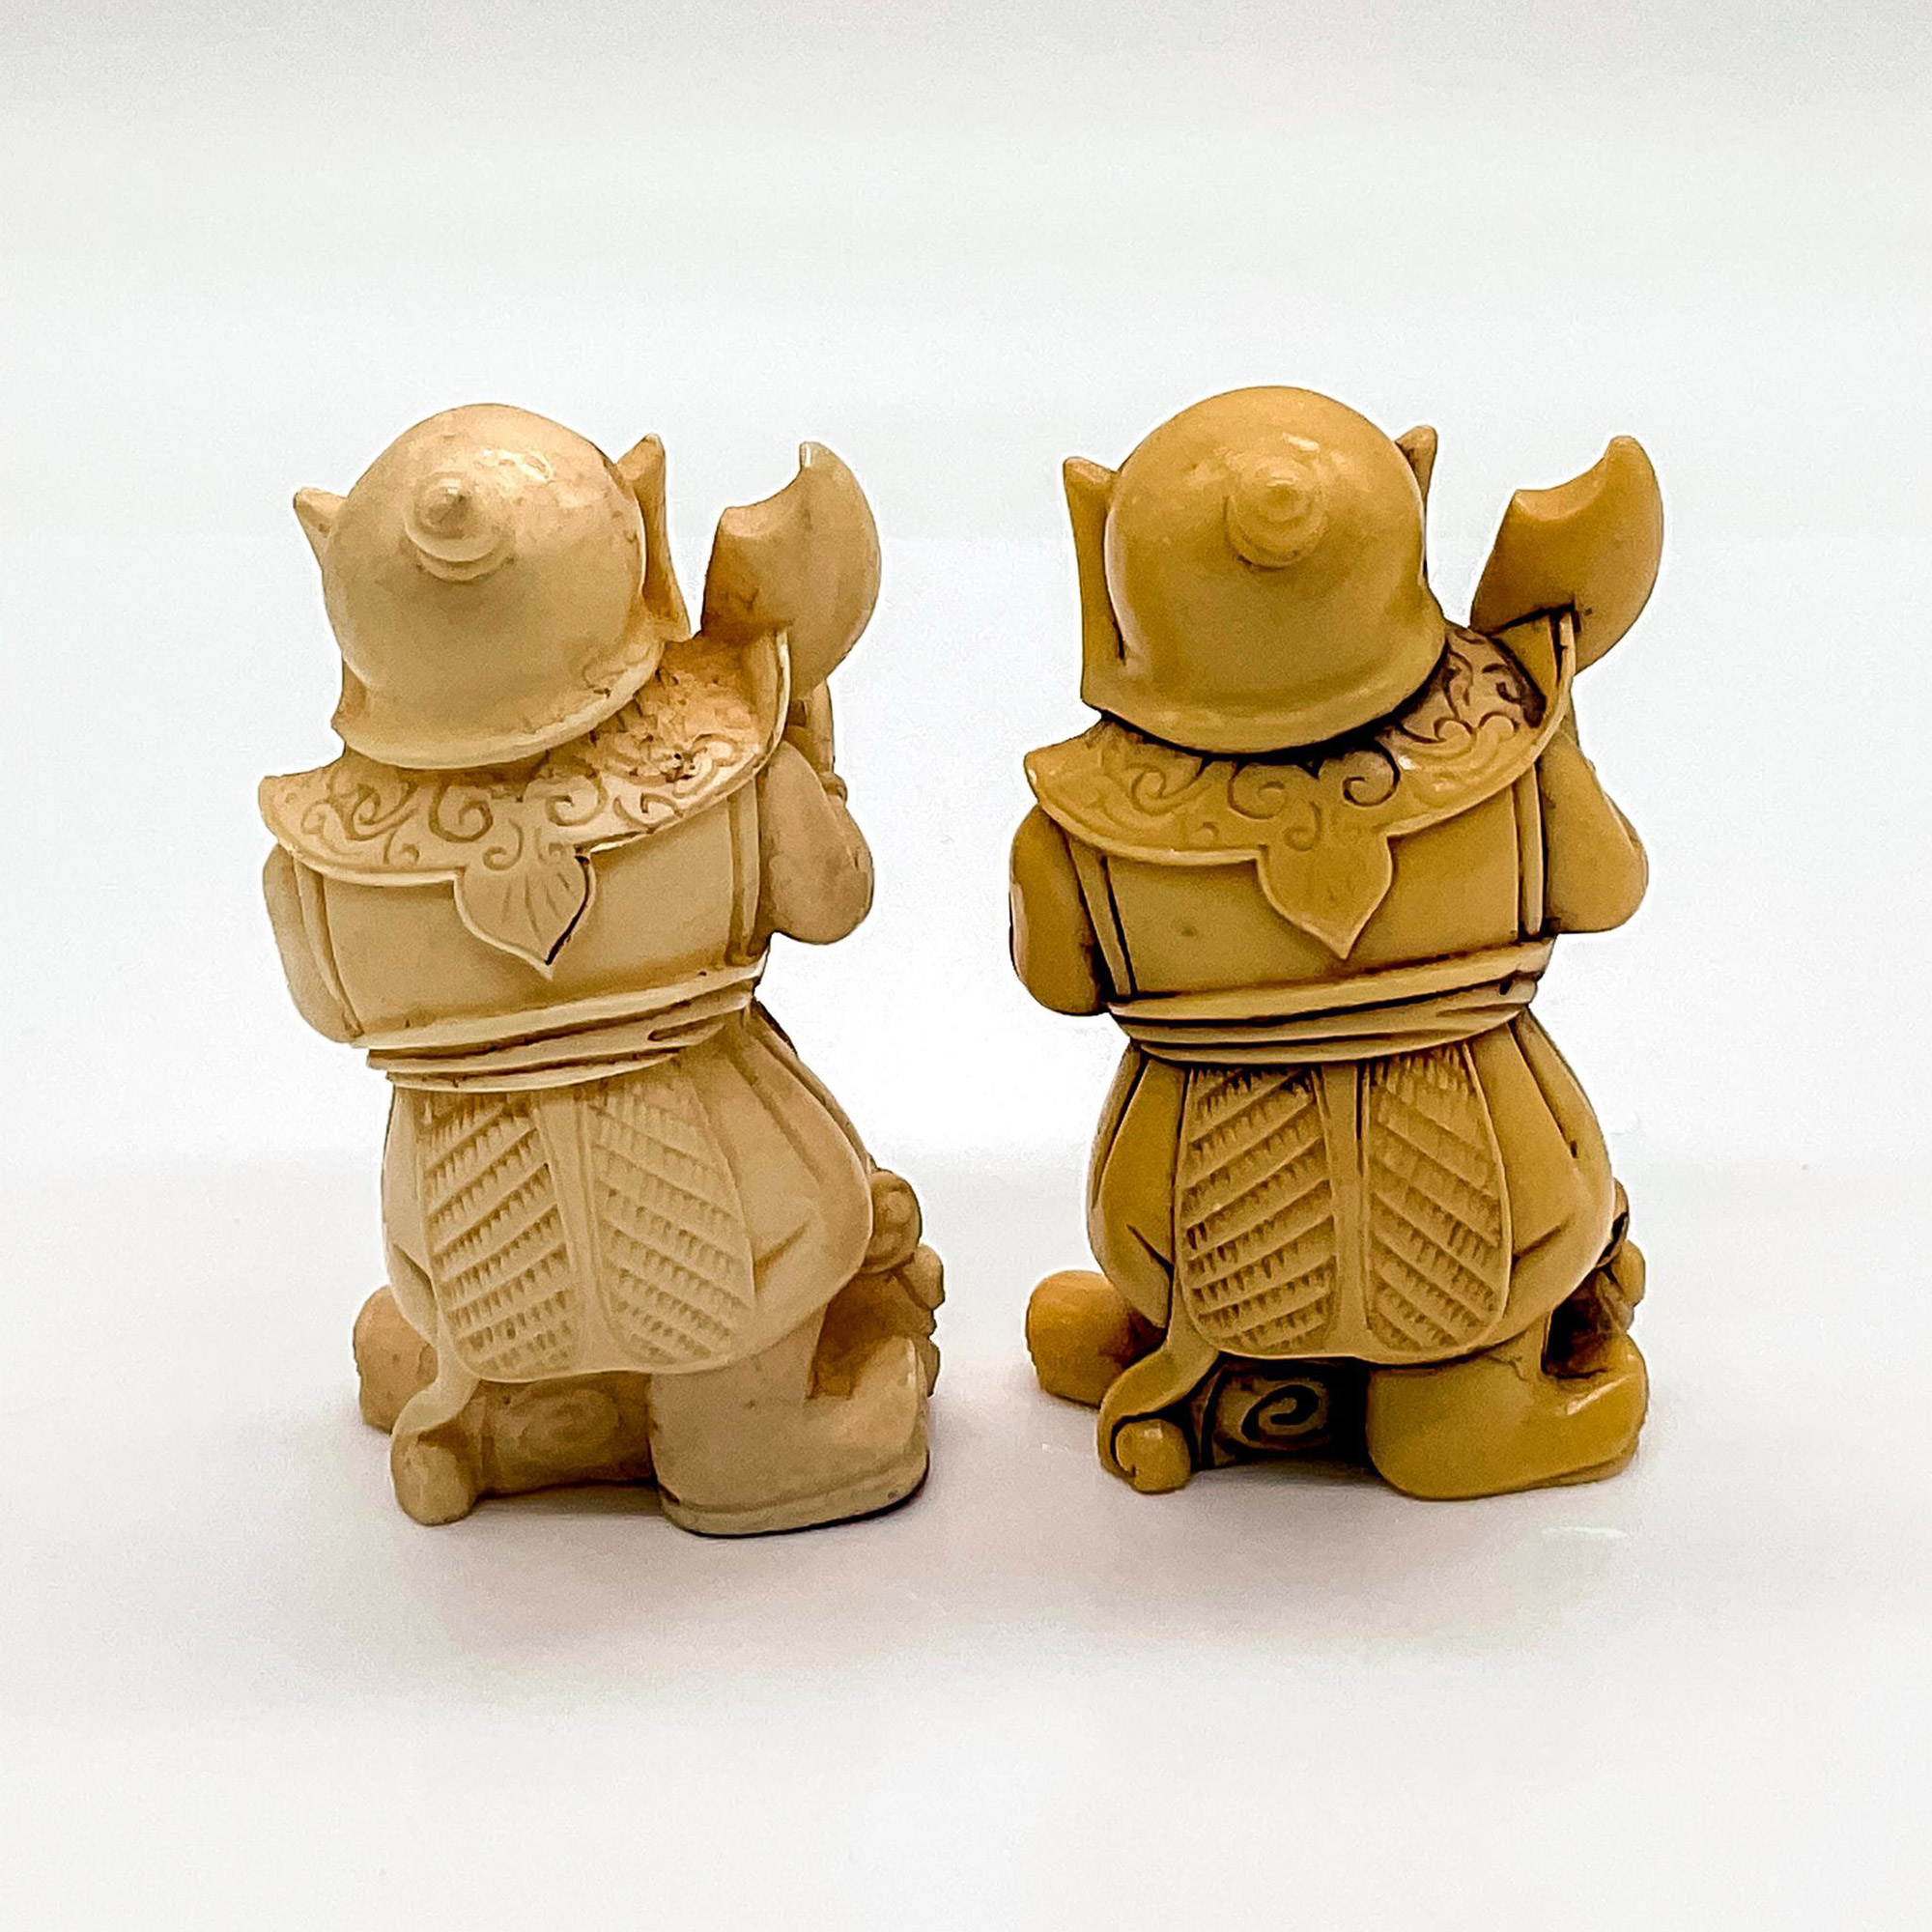 Pair of Chinese Resin Warrior Figurines - Image 2 of 3